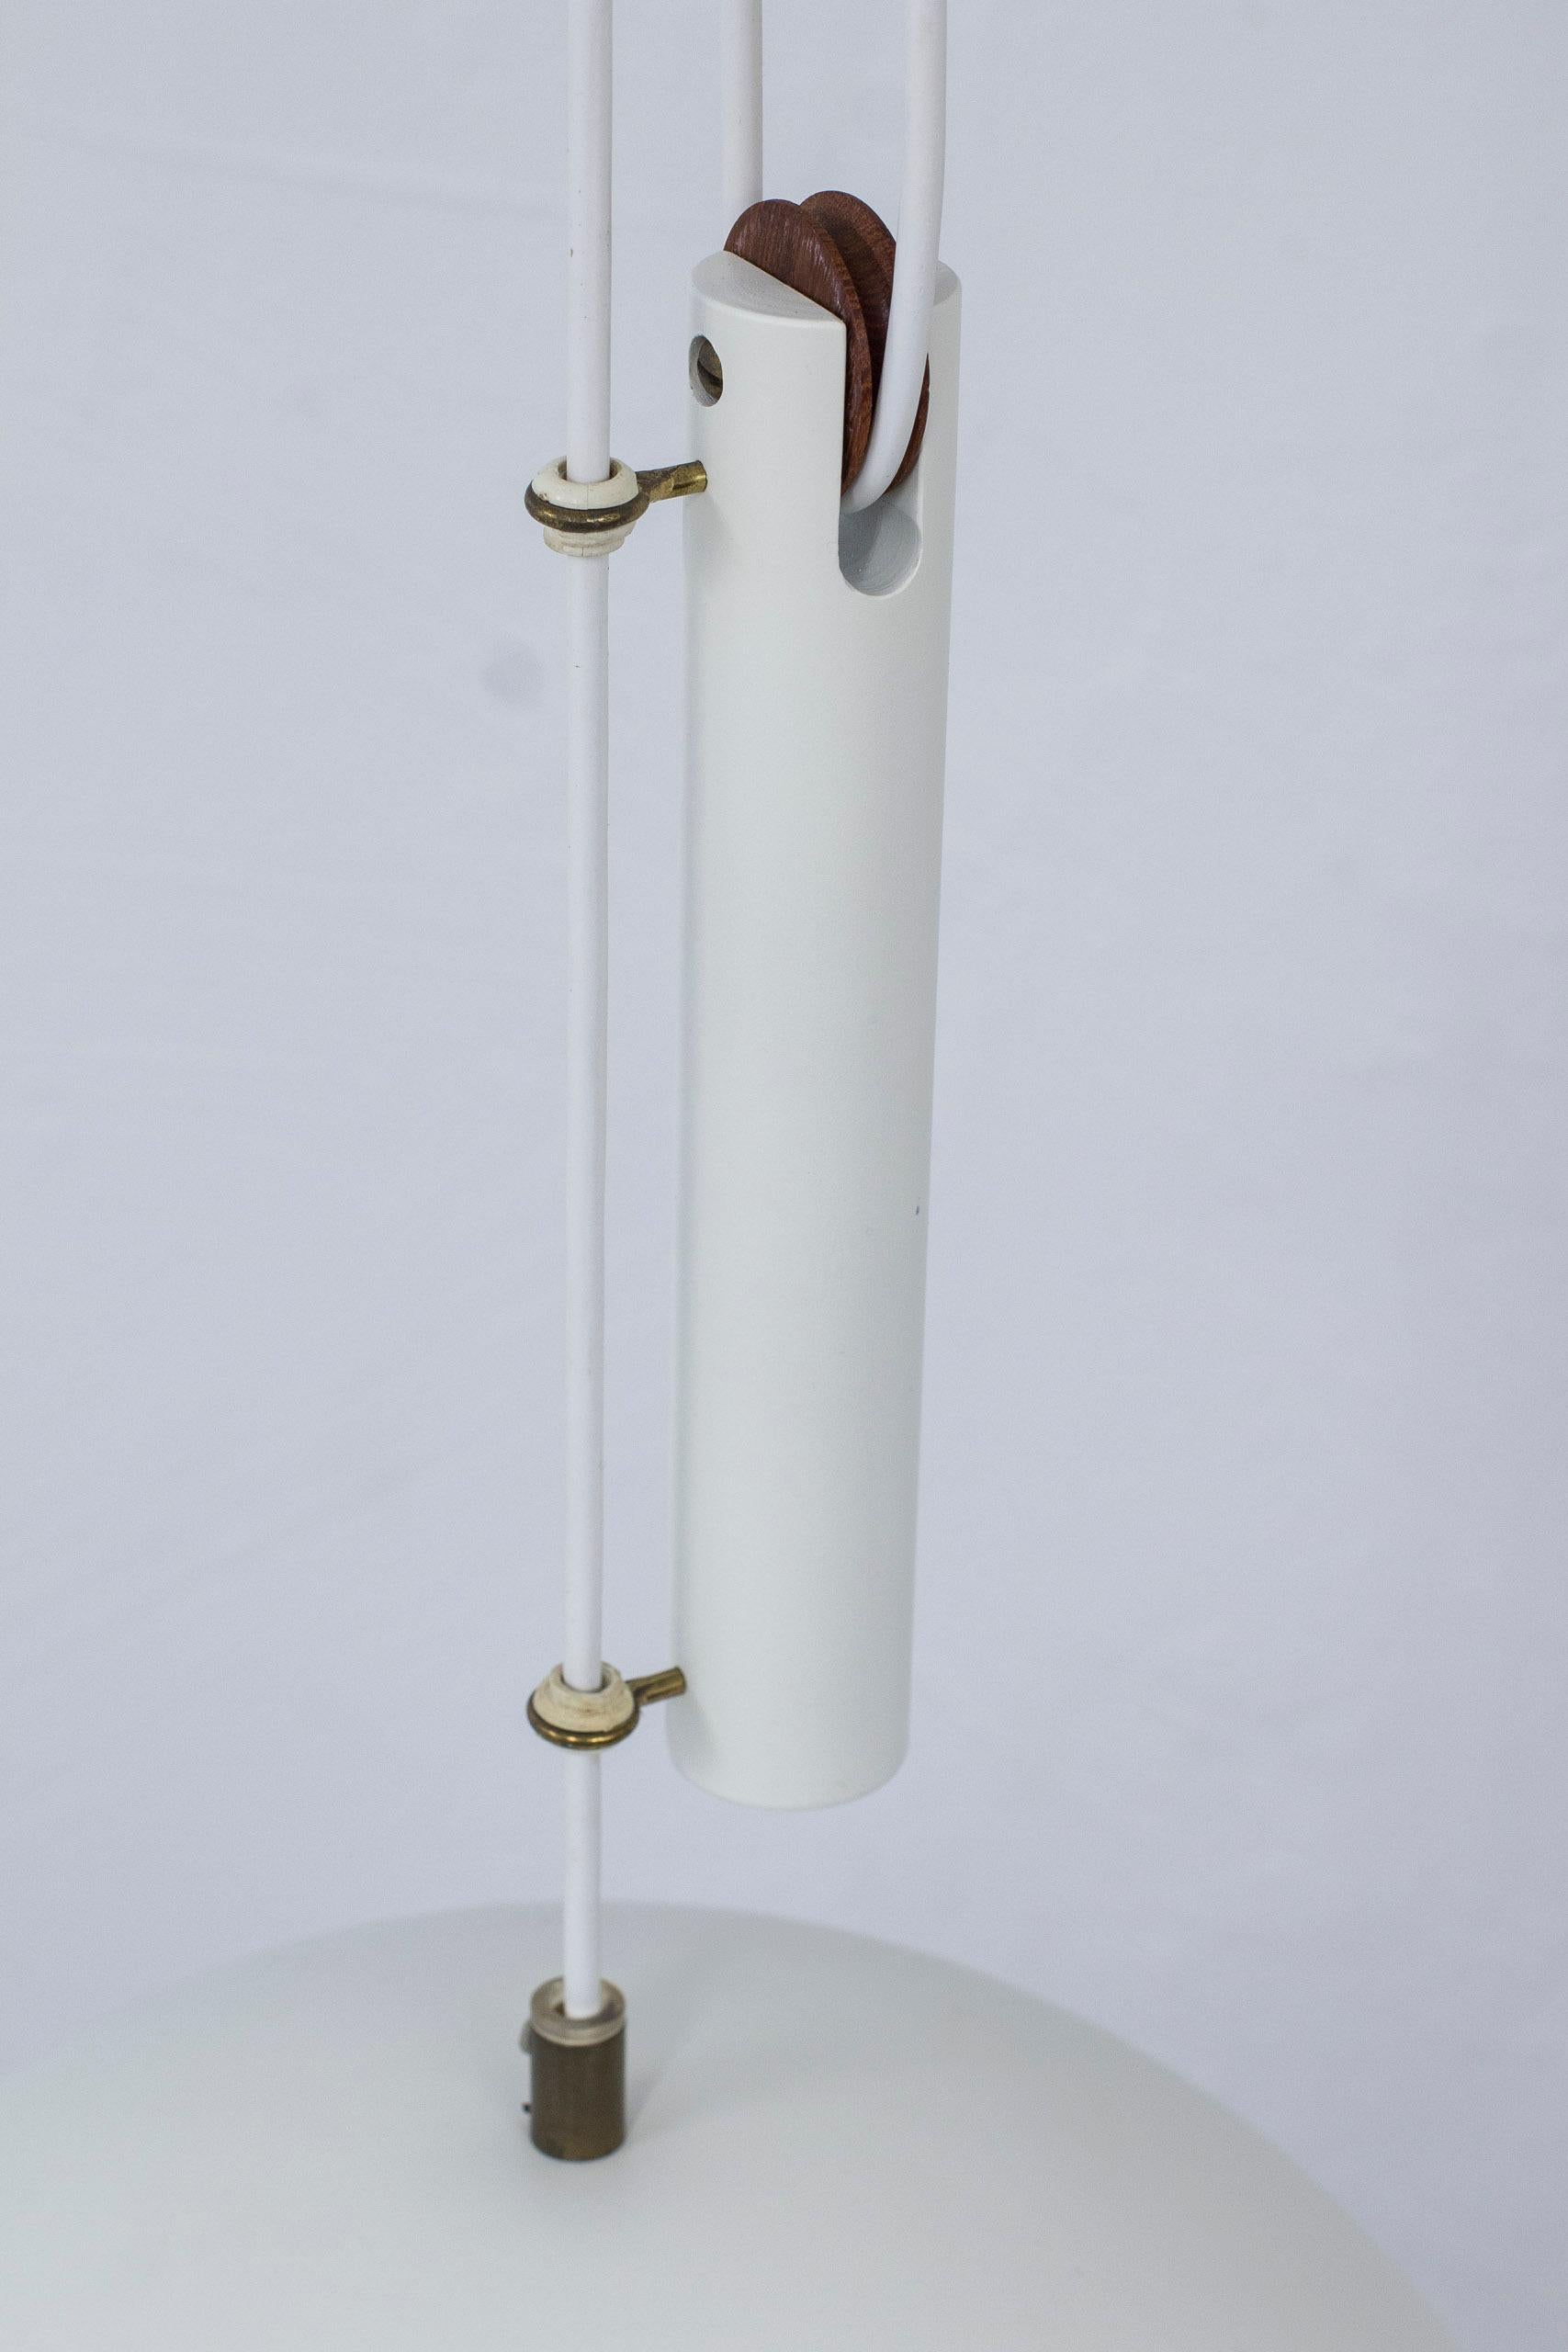 Swedish Pendant Lamps Attributed to Hans-Agne Jakobsson, Karlskron Lampfabrik, 1950s For Sale